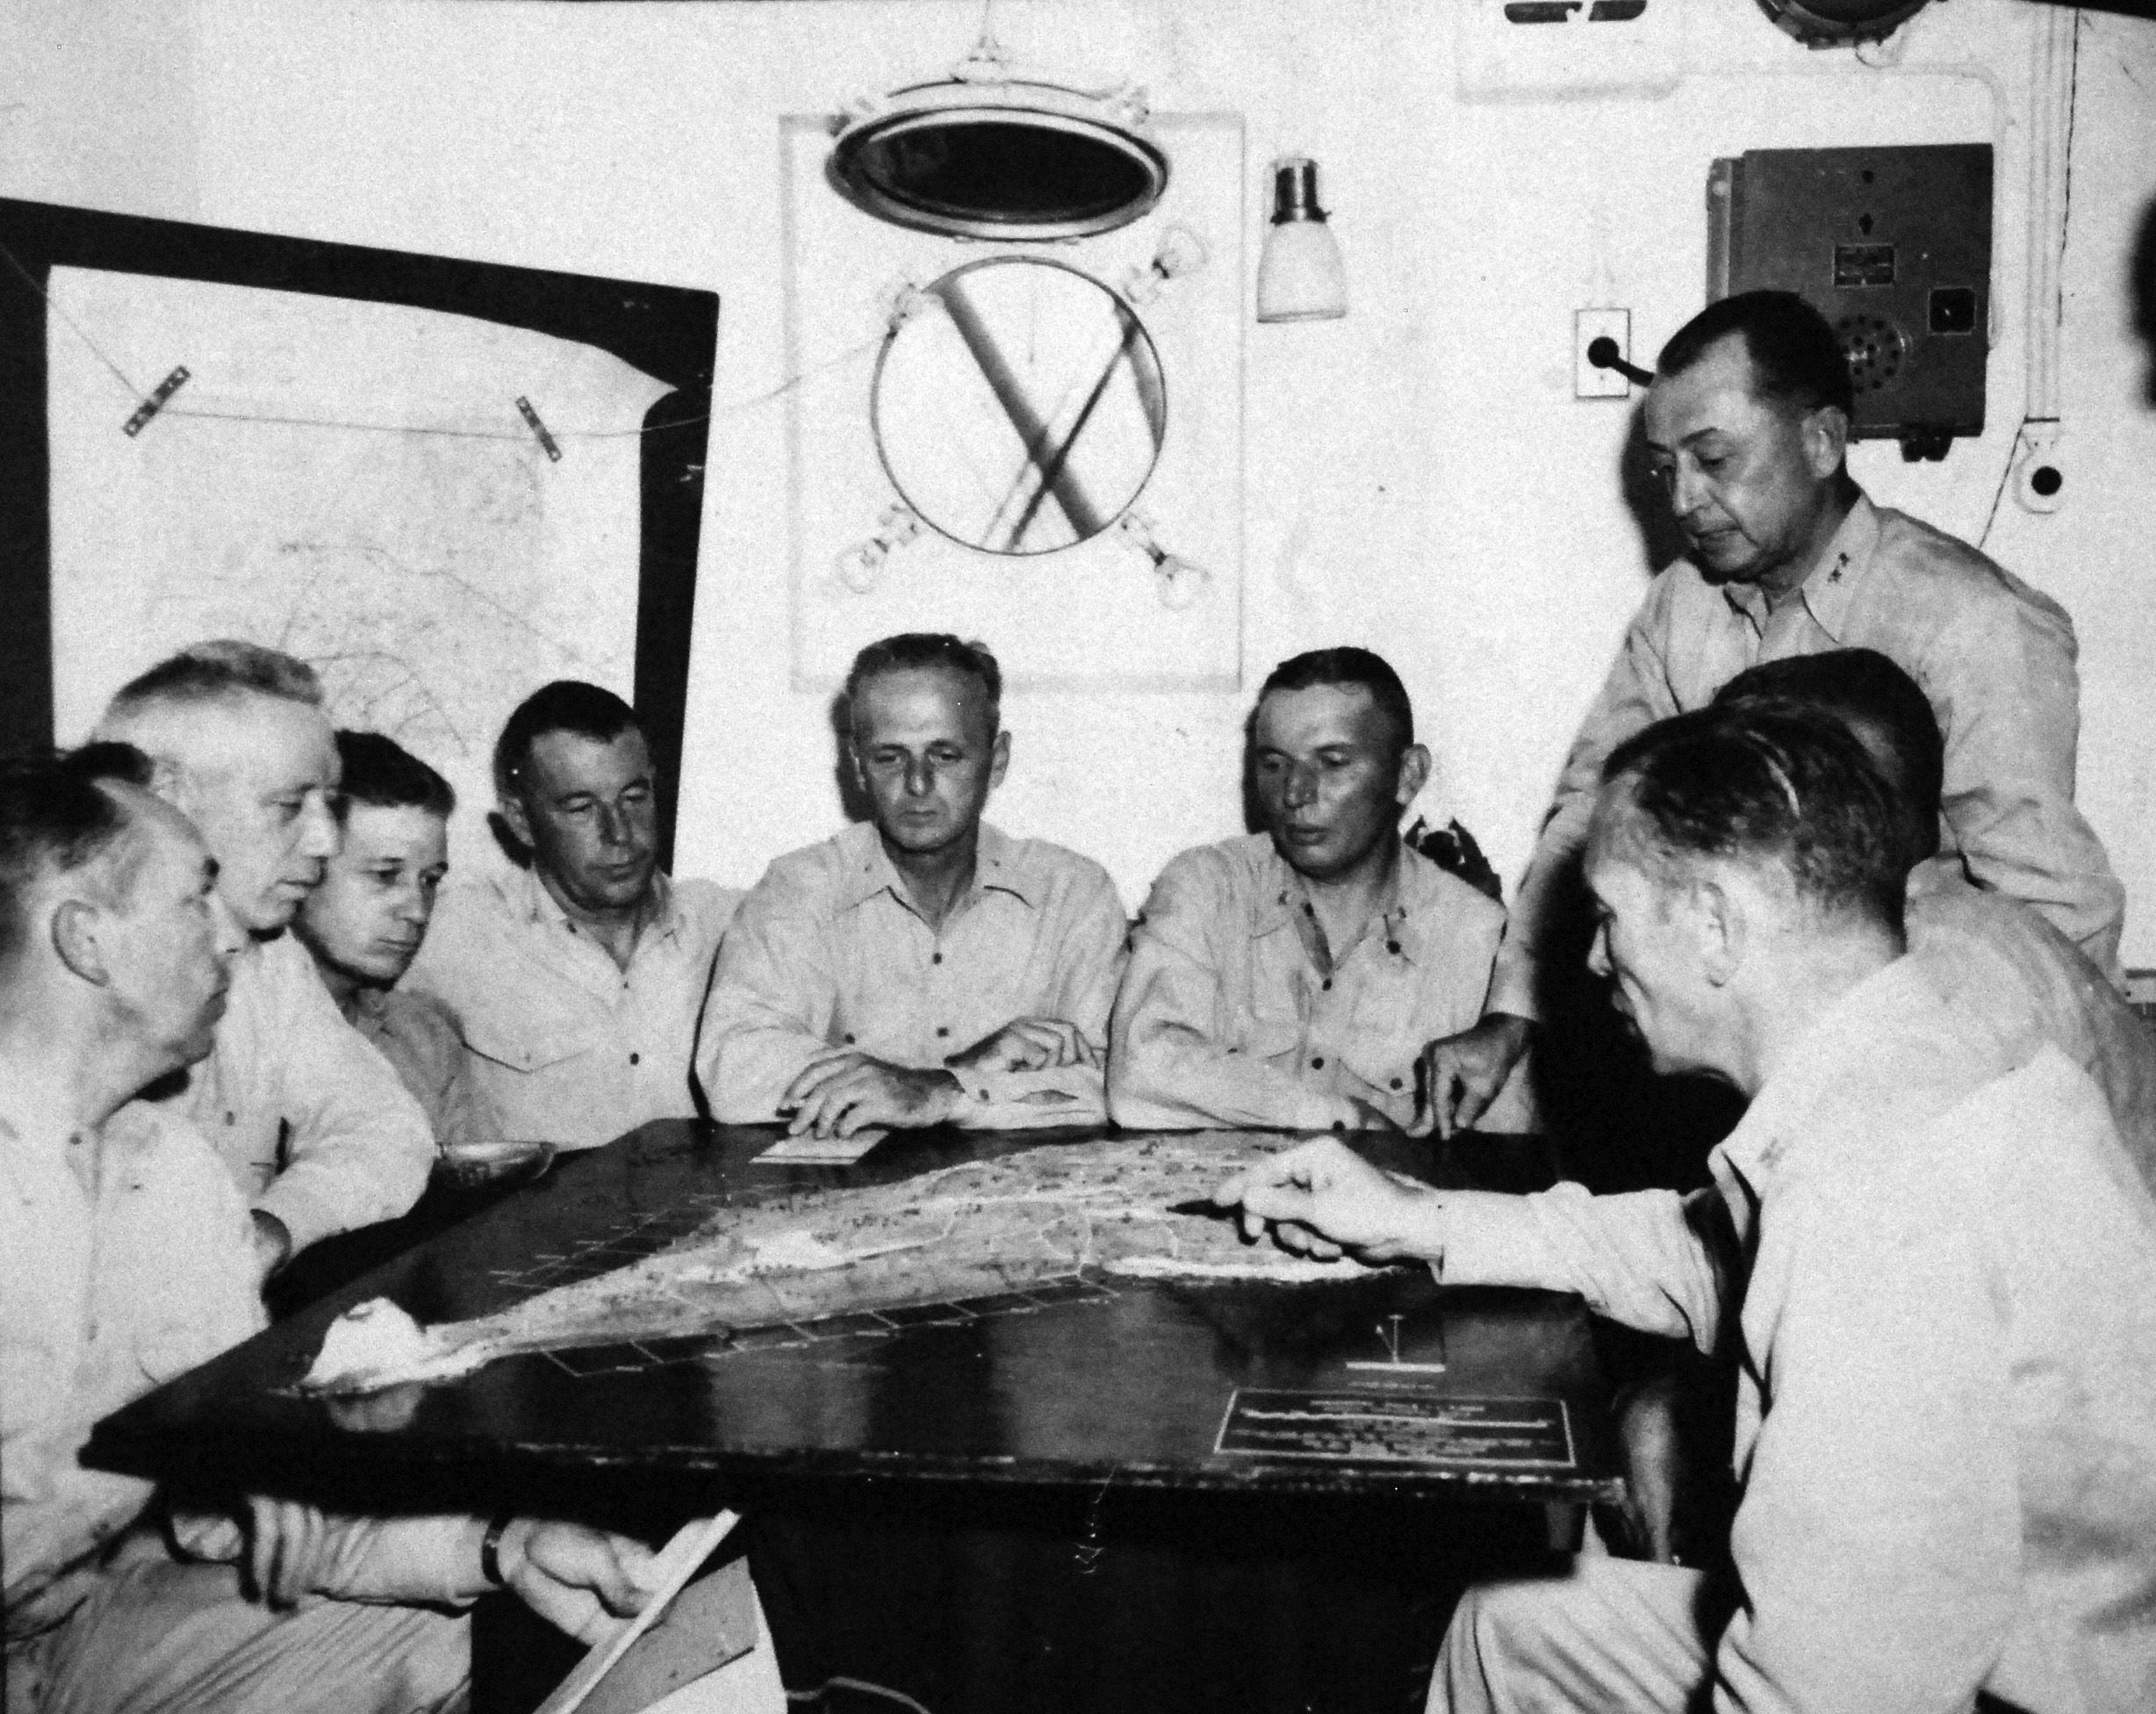 Clifton Cates in conference with his staff officers and regimental commanders, aboard a ship off Iwo Jima, Japan, Feb-Mar 1945